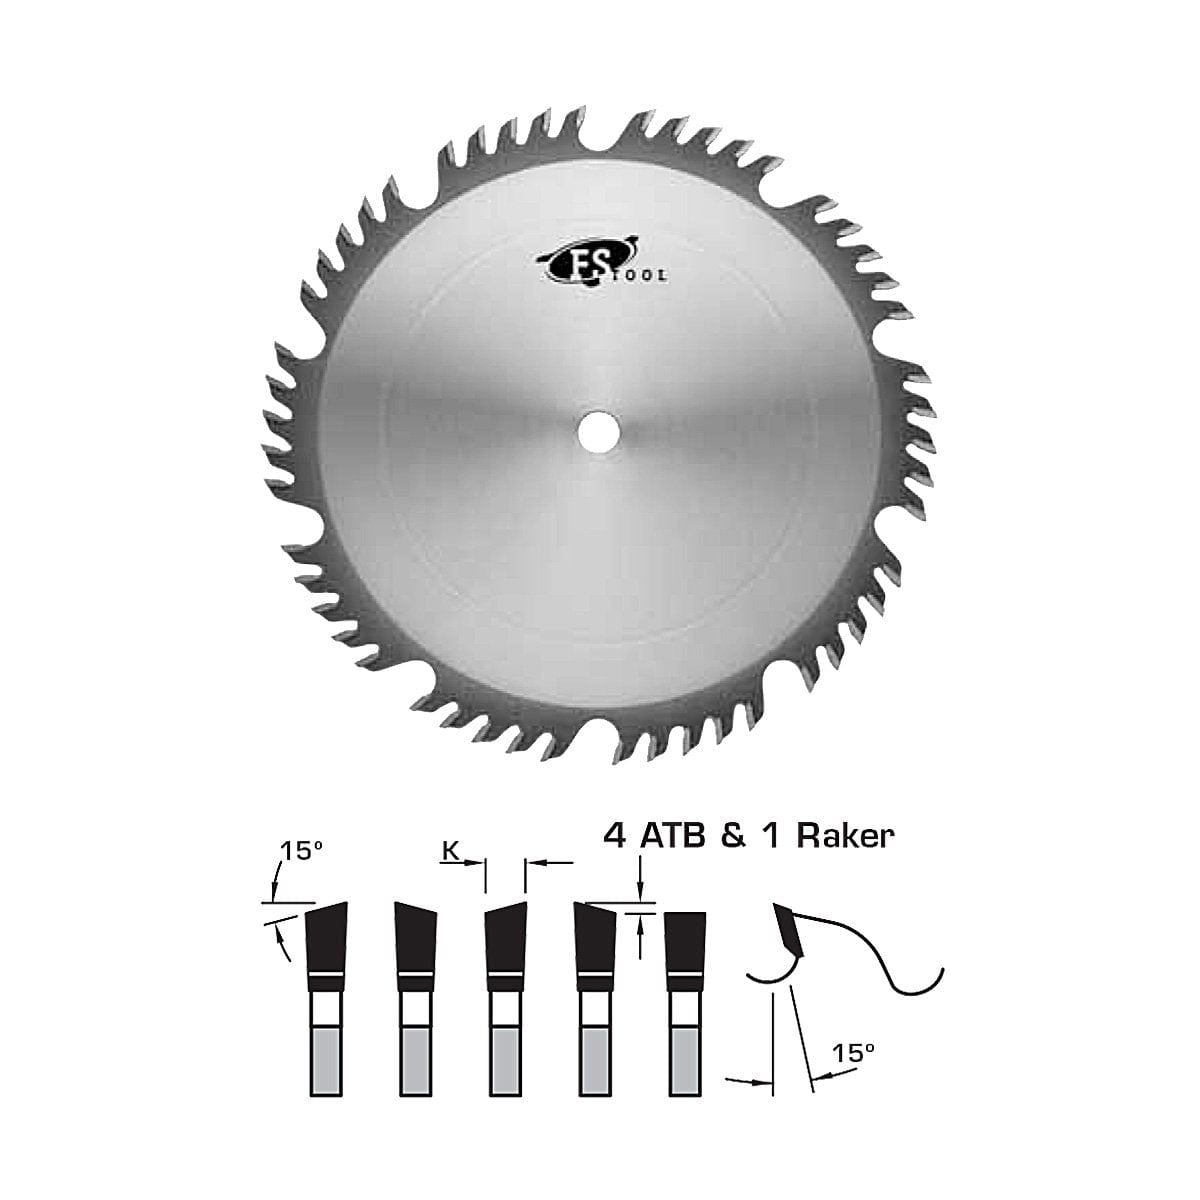 FS Tool L55250 Saw Blade Combination Saw Blade 10" 50 Tooth - 5/8" Bore